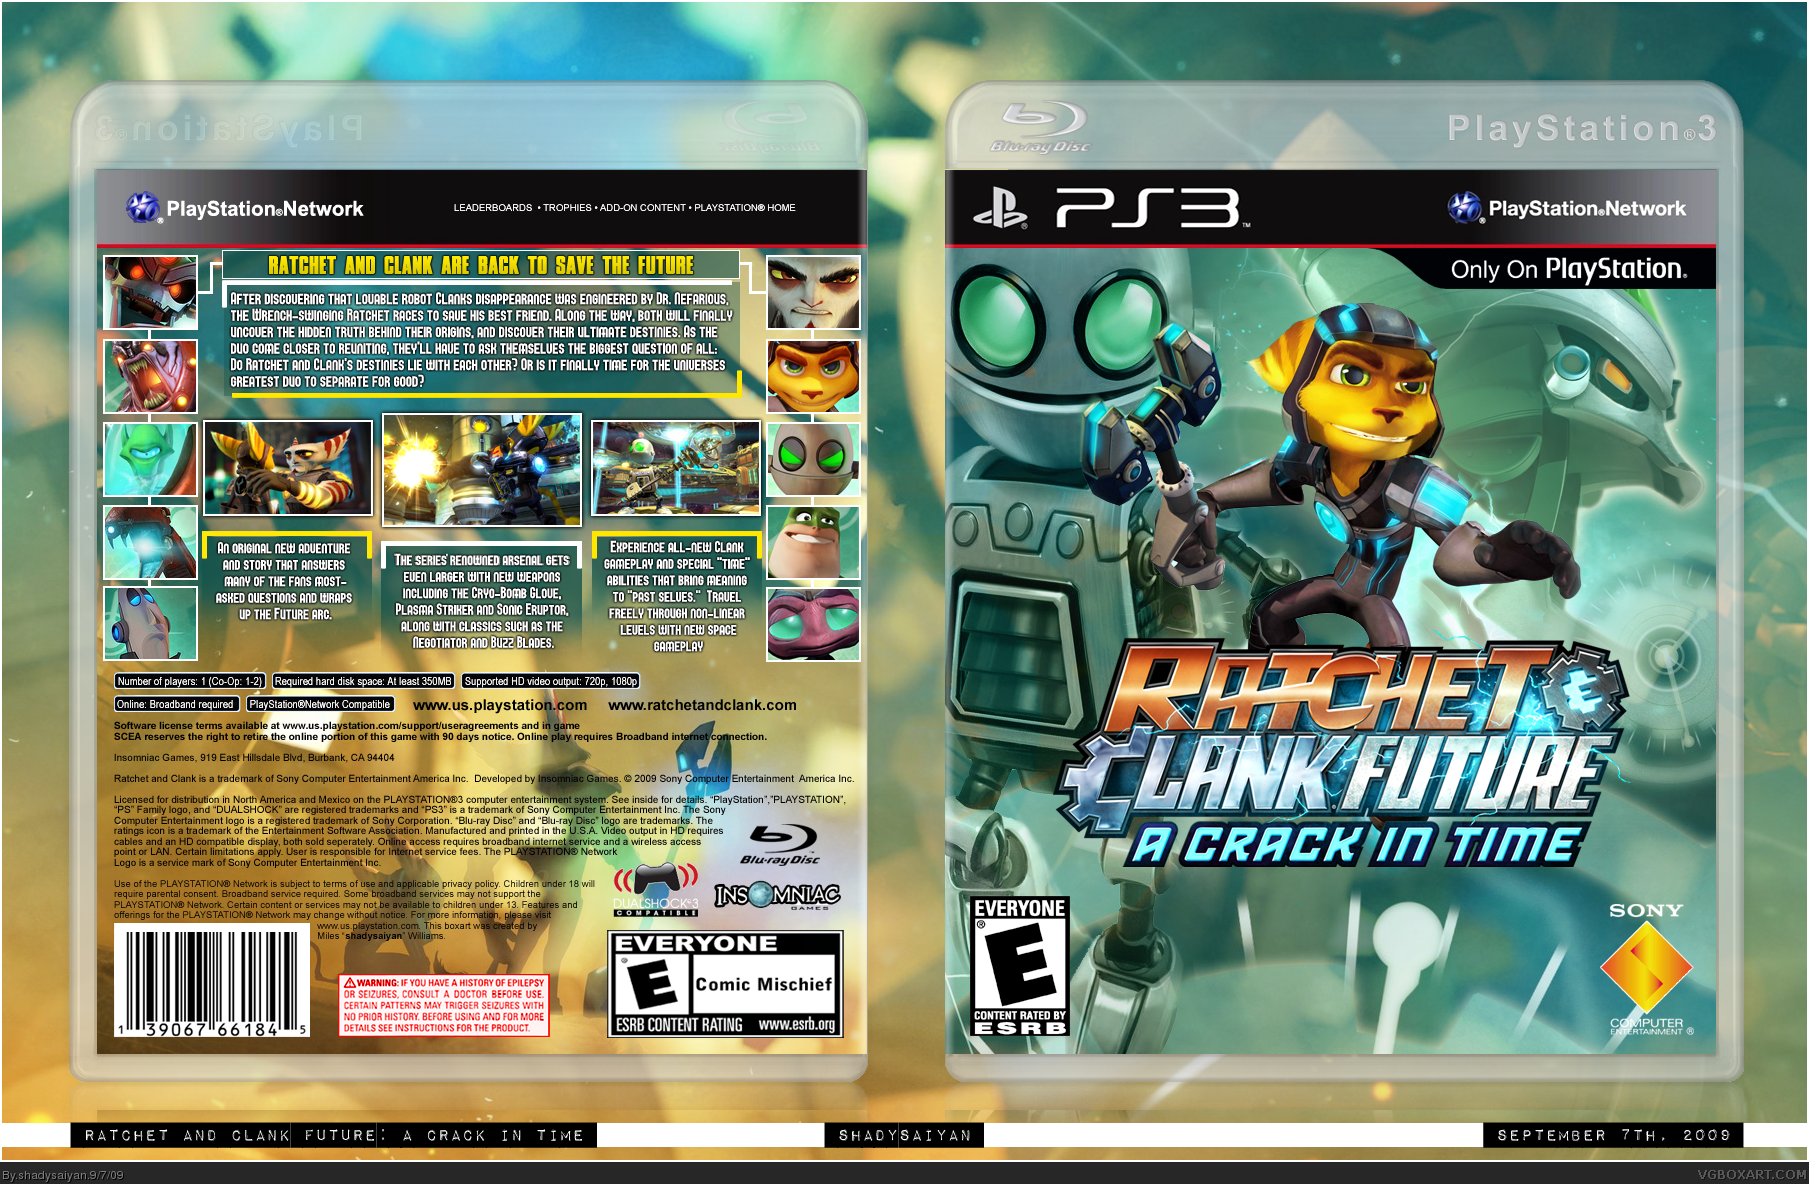 Ratchet & Clank Future: A Crack in Time box cover